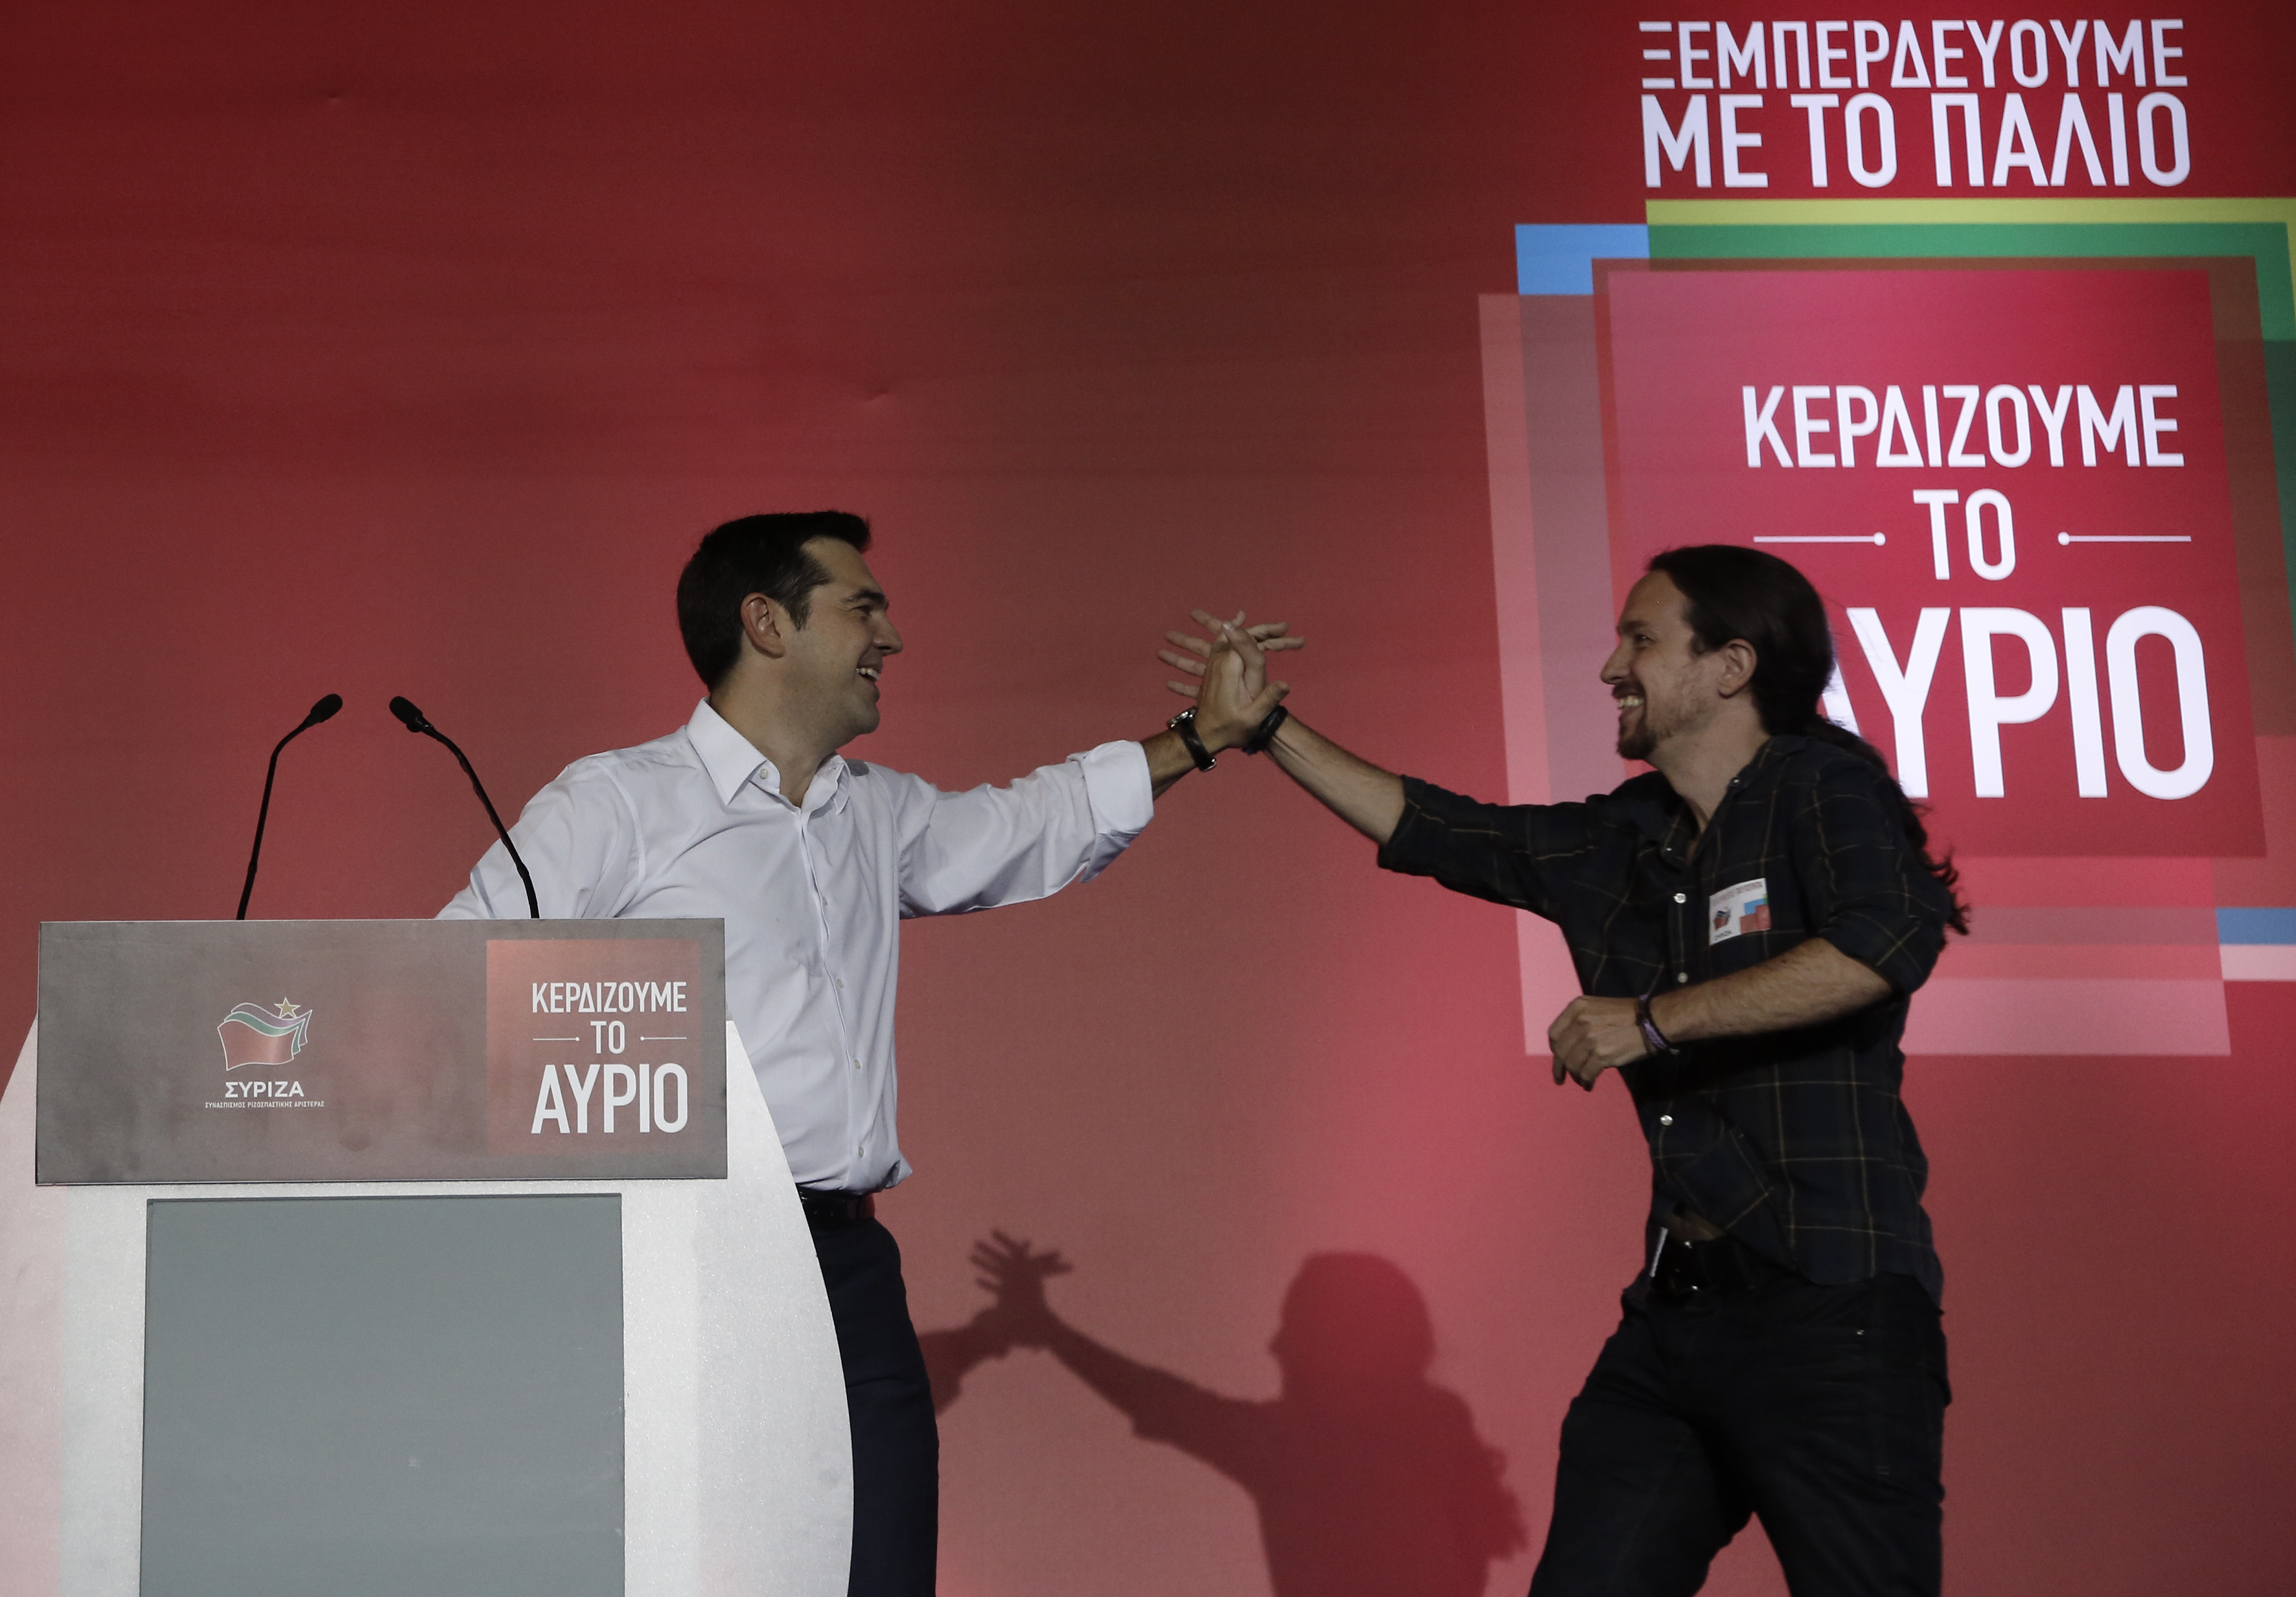 Greek elections: bracing for Monday's poker game